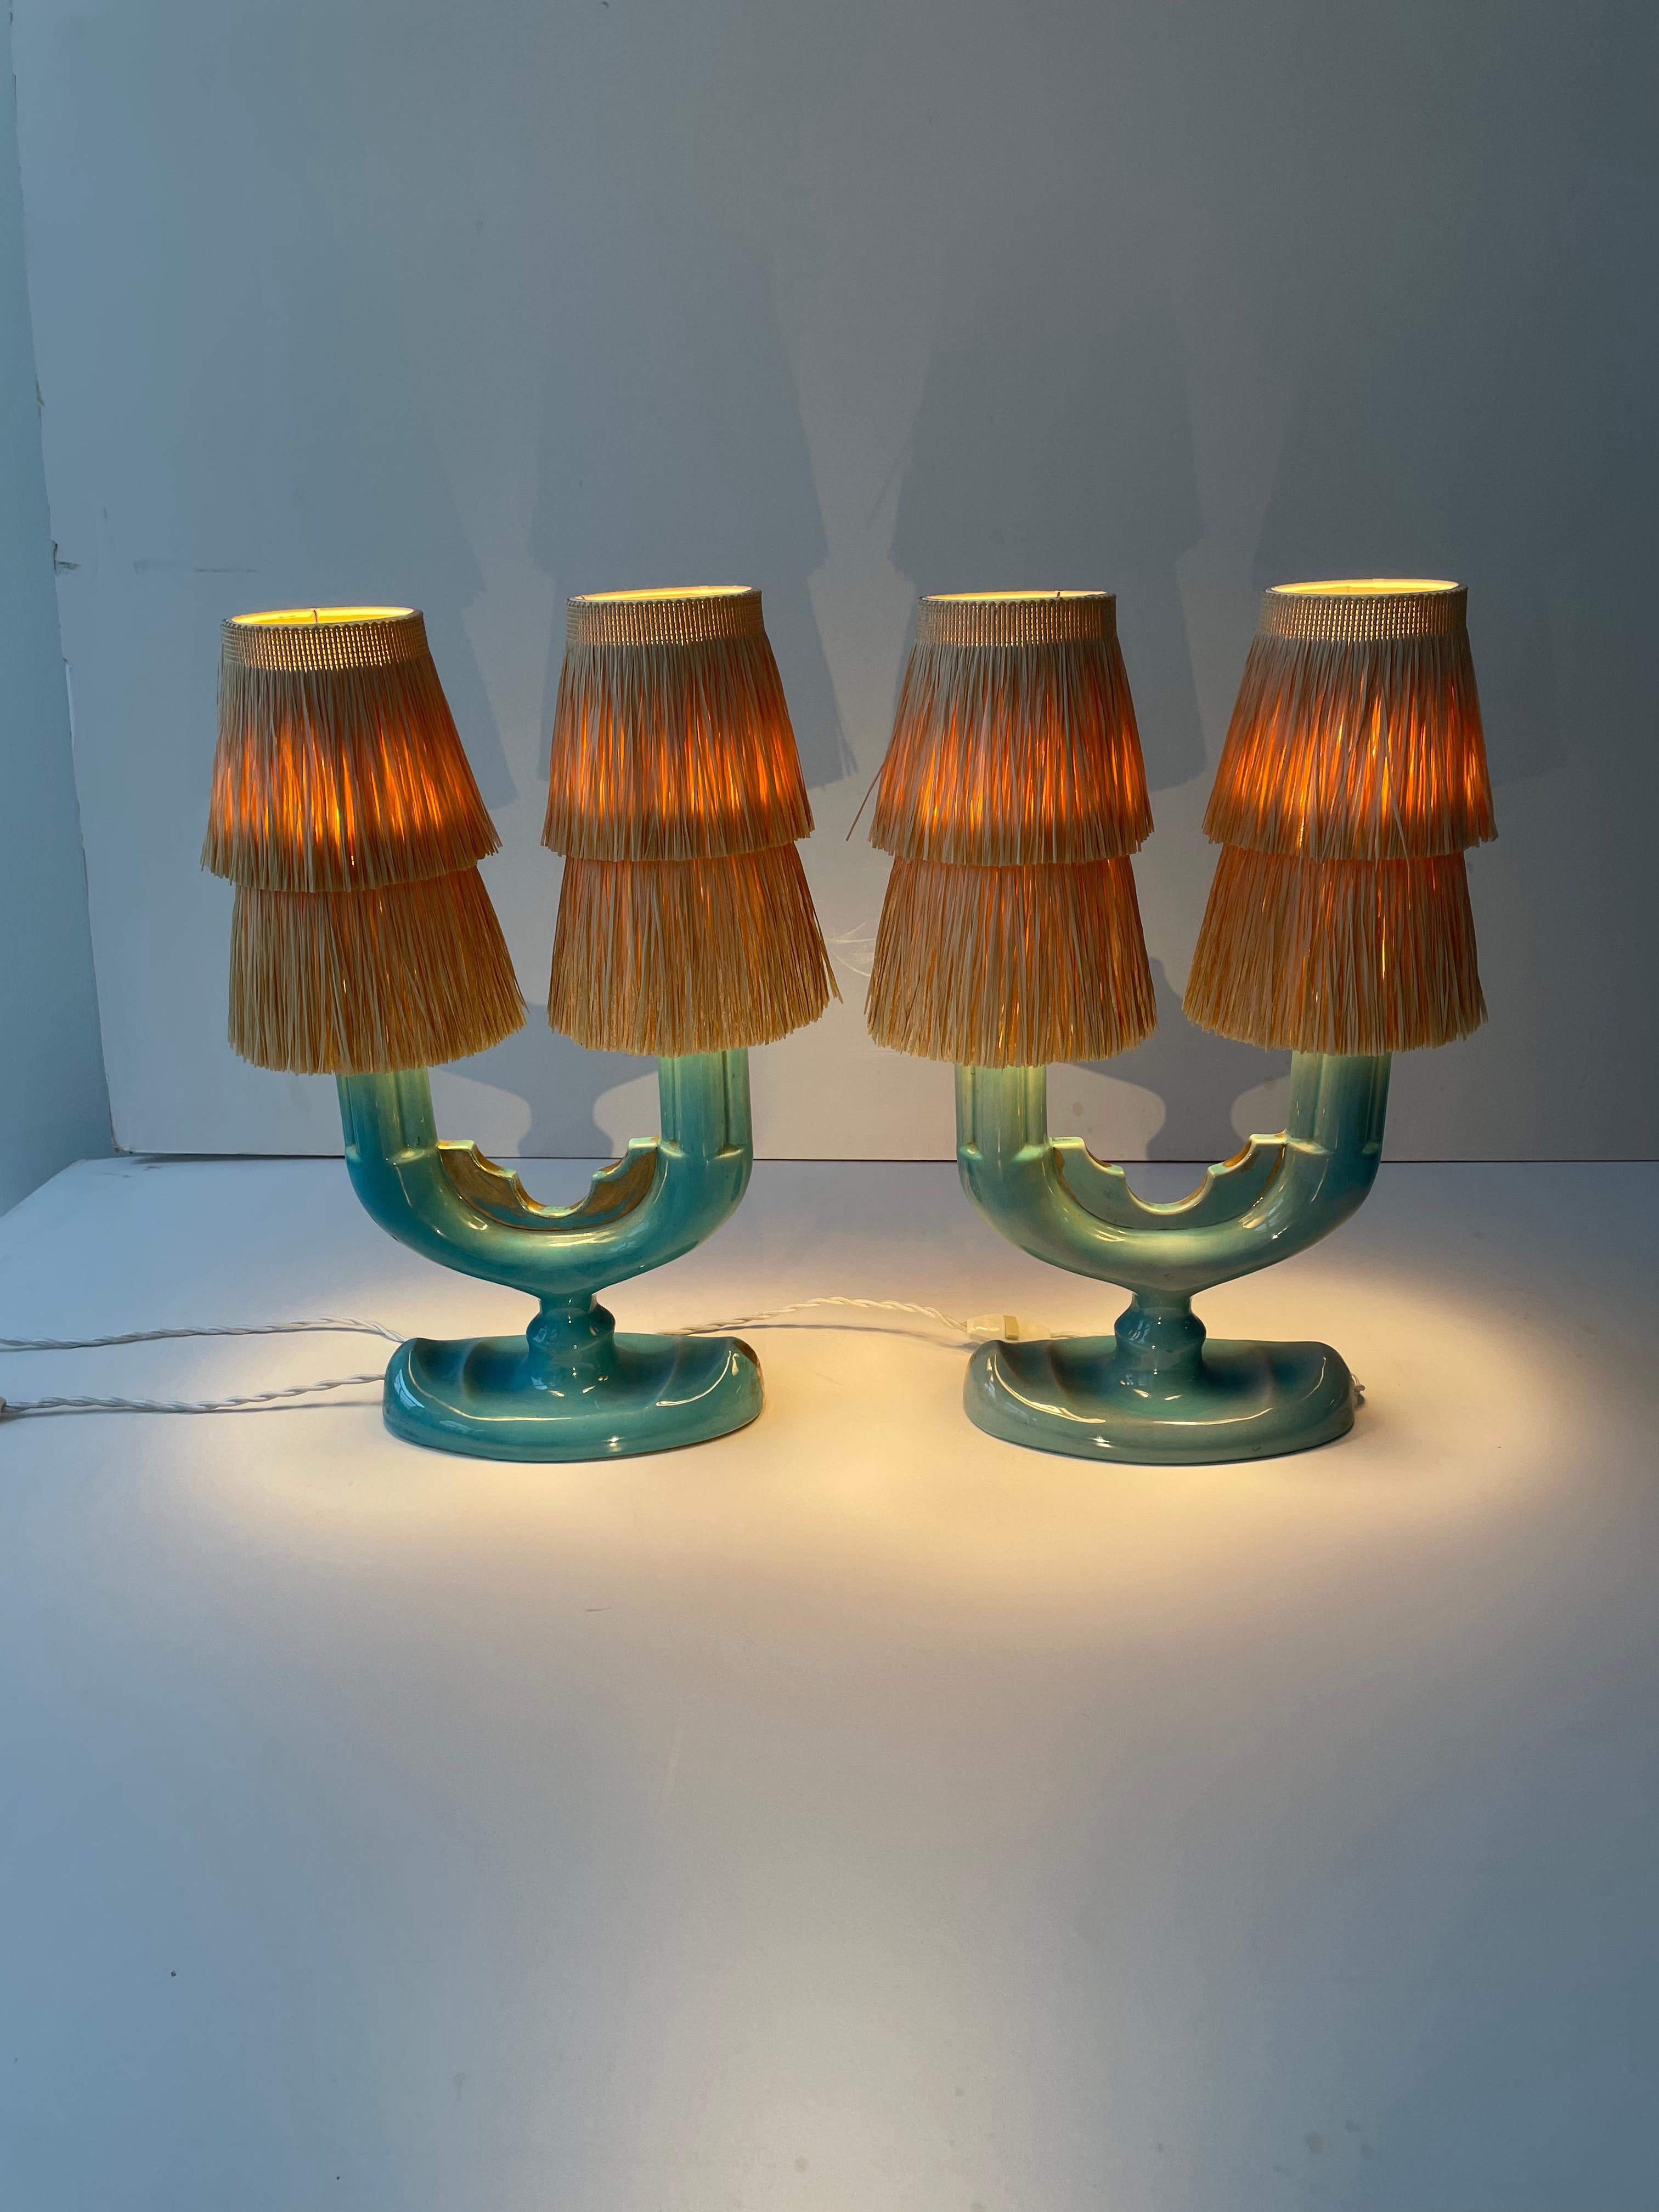 Beautiful Table Lights colour Turquoise From COCERAM BELGIUM  signed on the Bottom new textile wiring (textile cable colour white)  size of Ceramic  base 25cm H x 33 cm W x 15cm D, Total Height incl. Lampshade 46cm, hand crafted Raffia Fringe Cornet